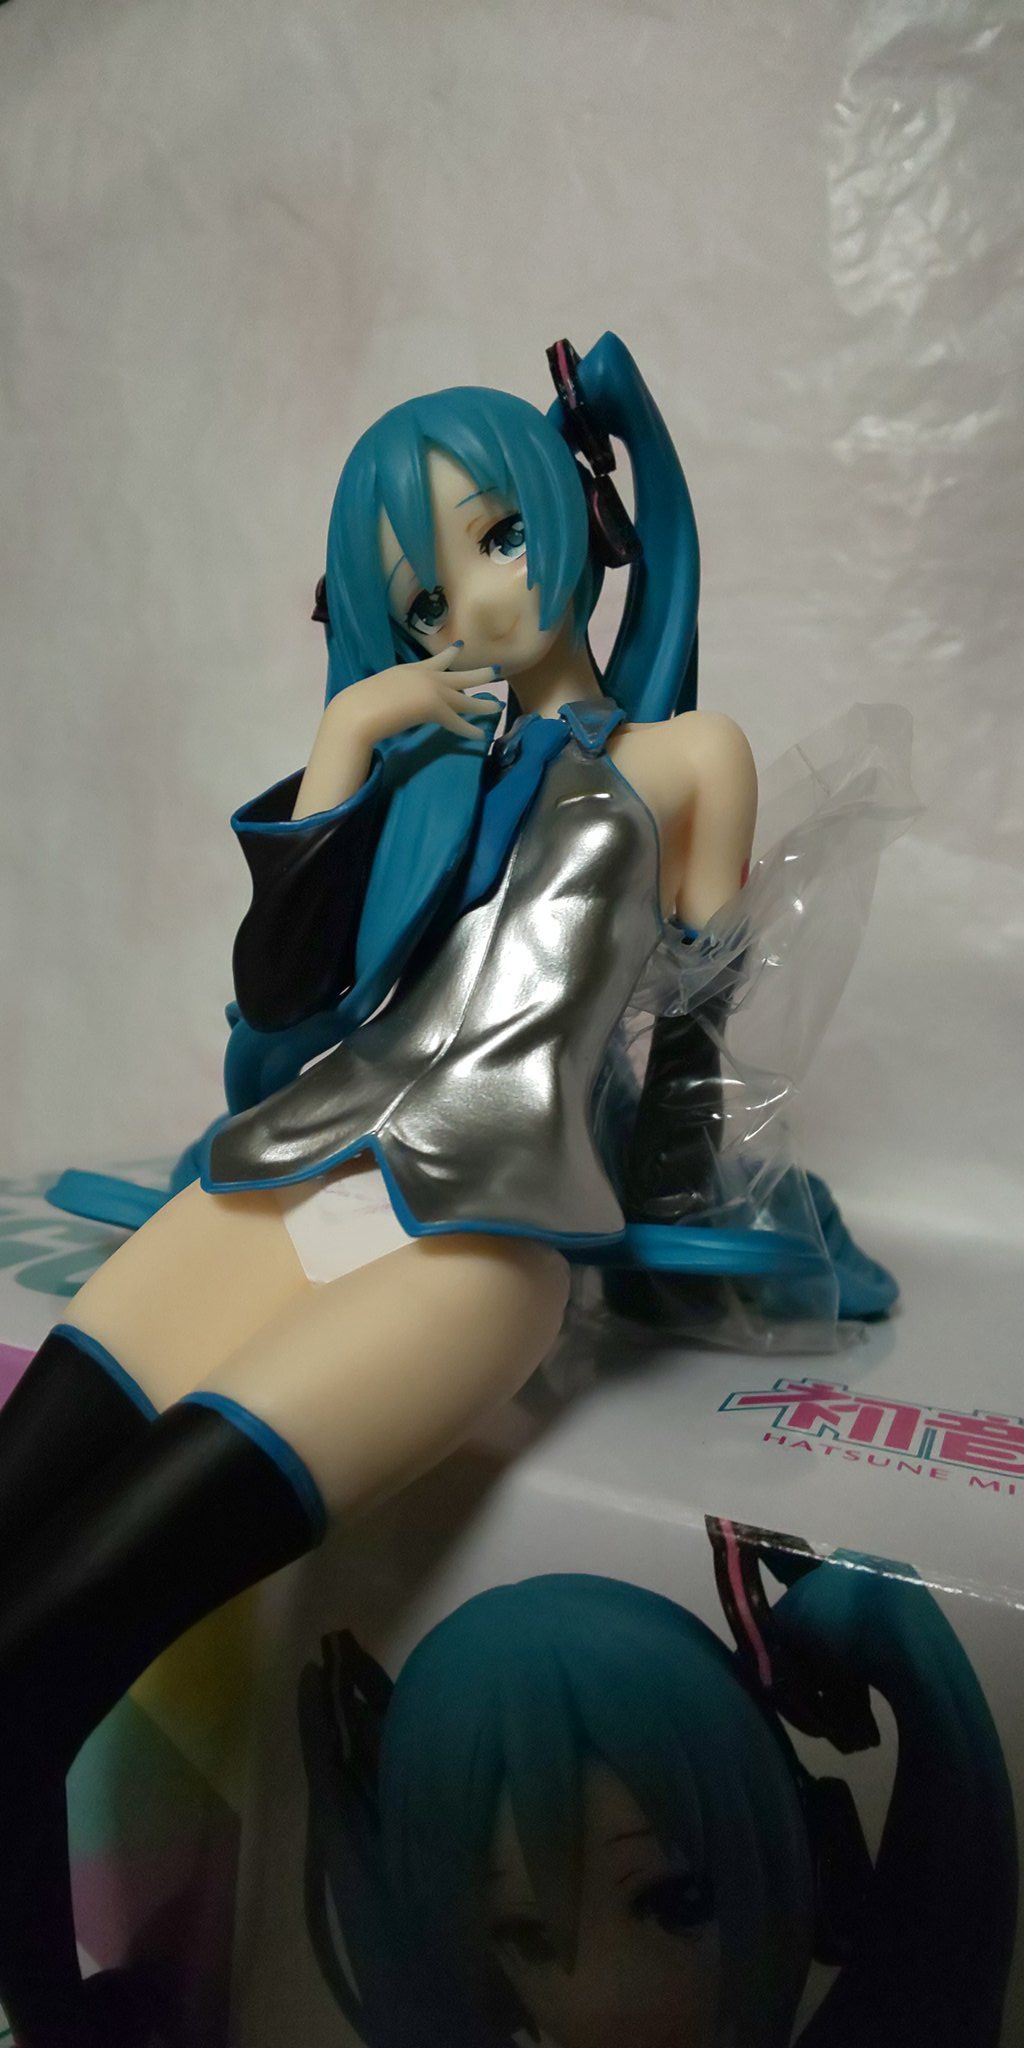 [Hatsune Miku] Nuyoru Stopper Figure, too much color and become a topic erotic 19